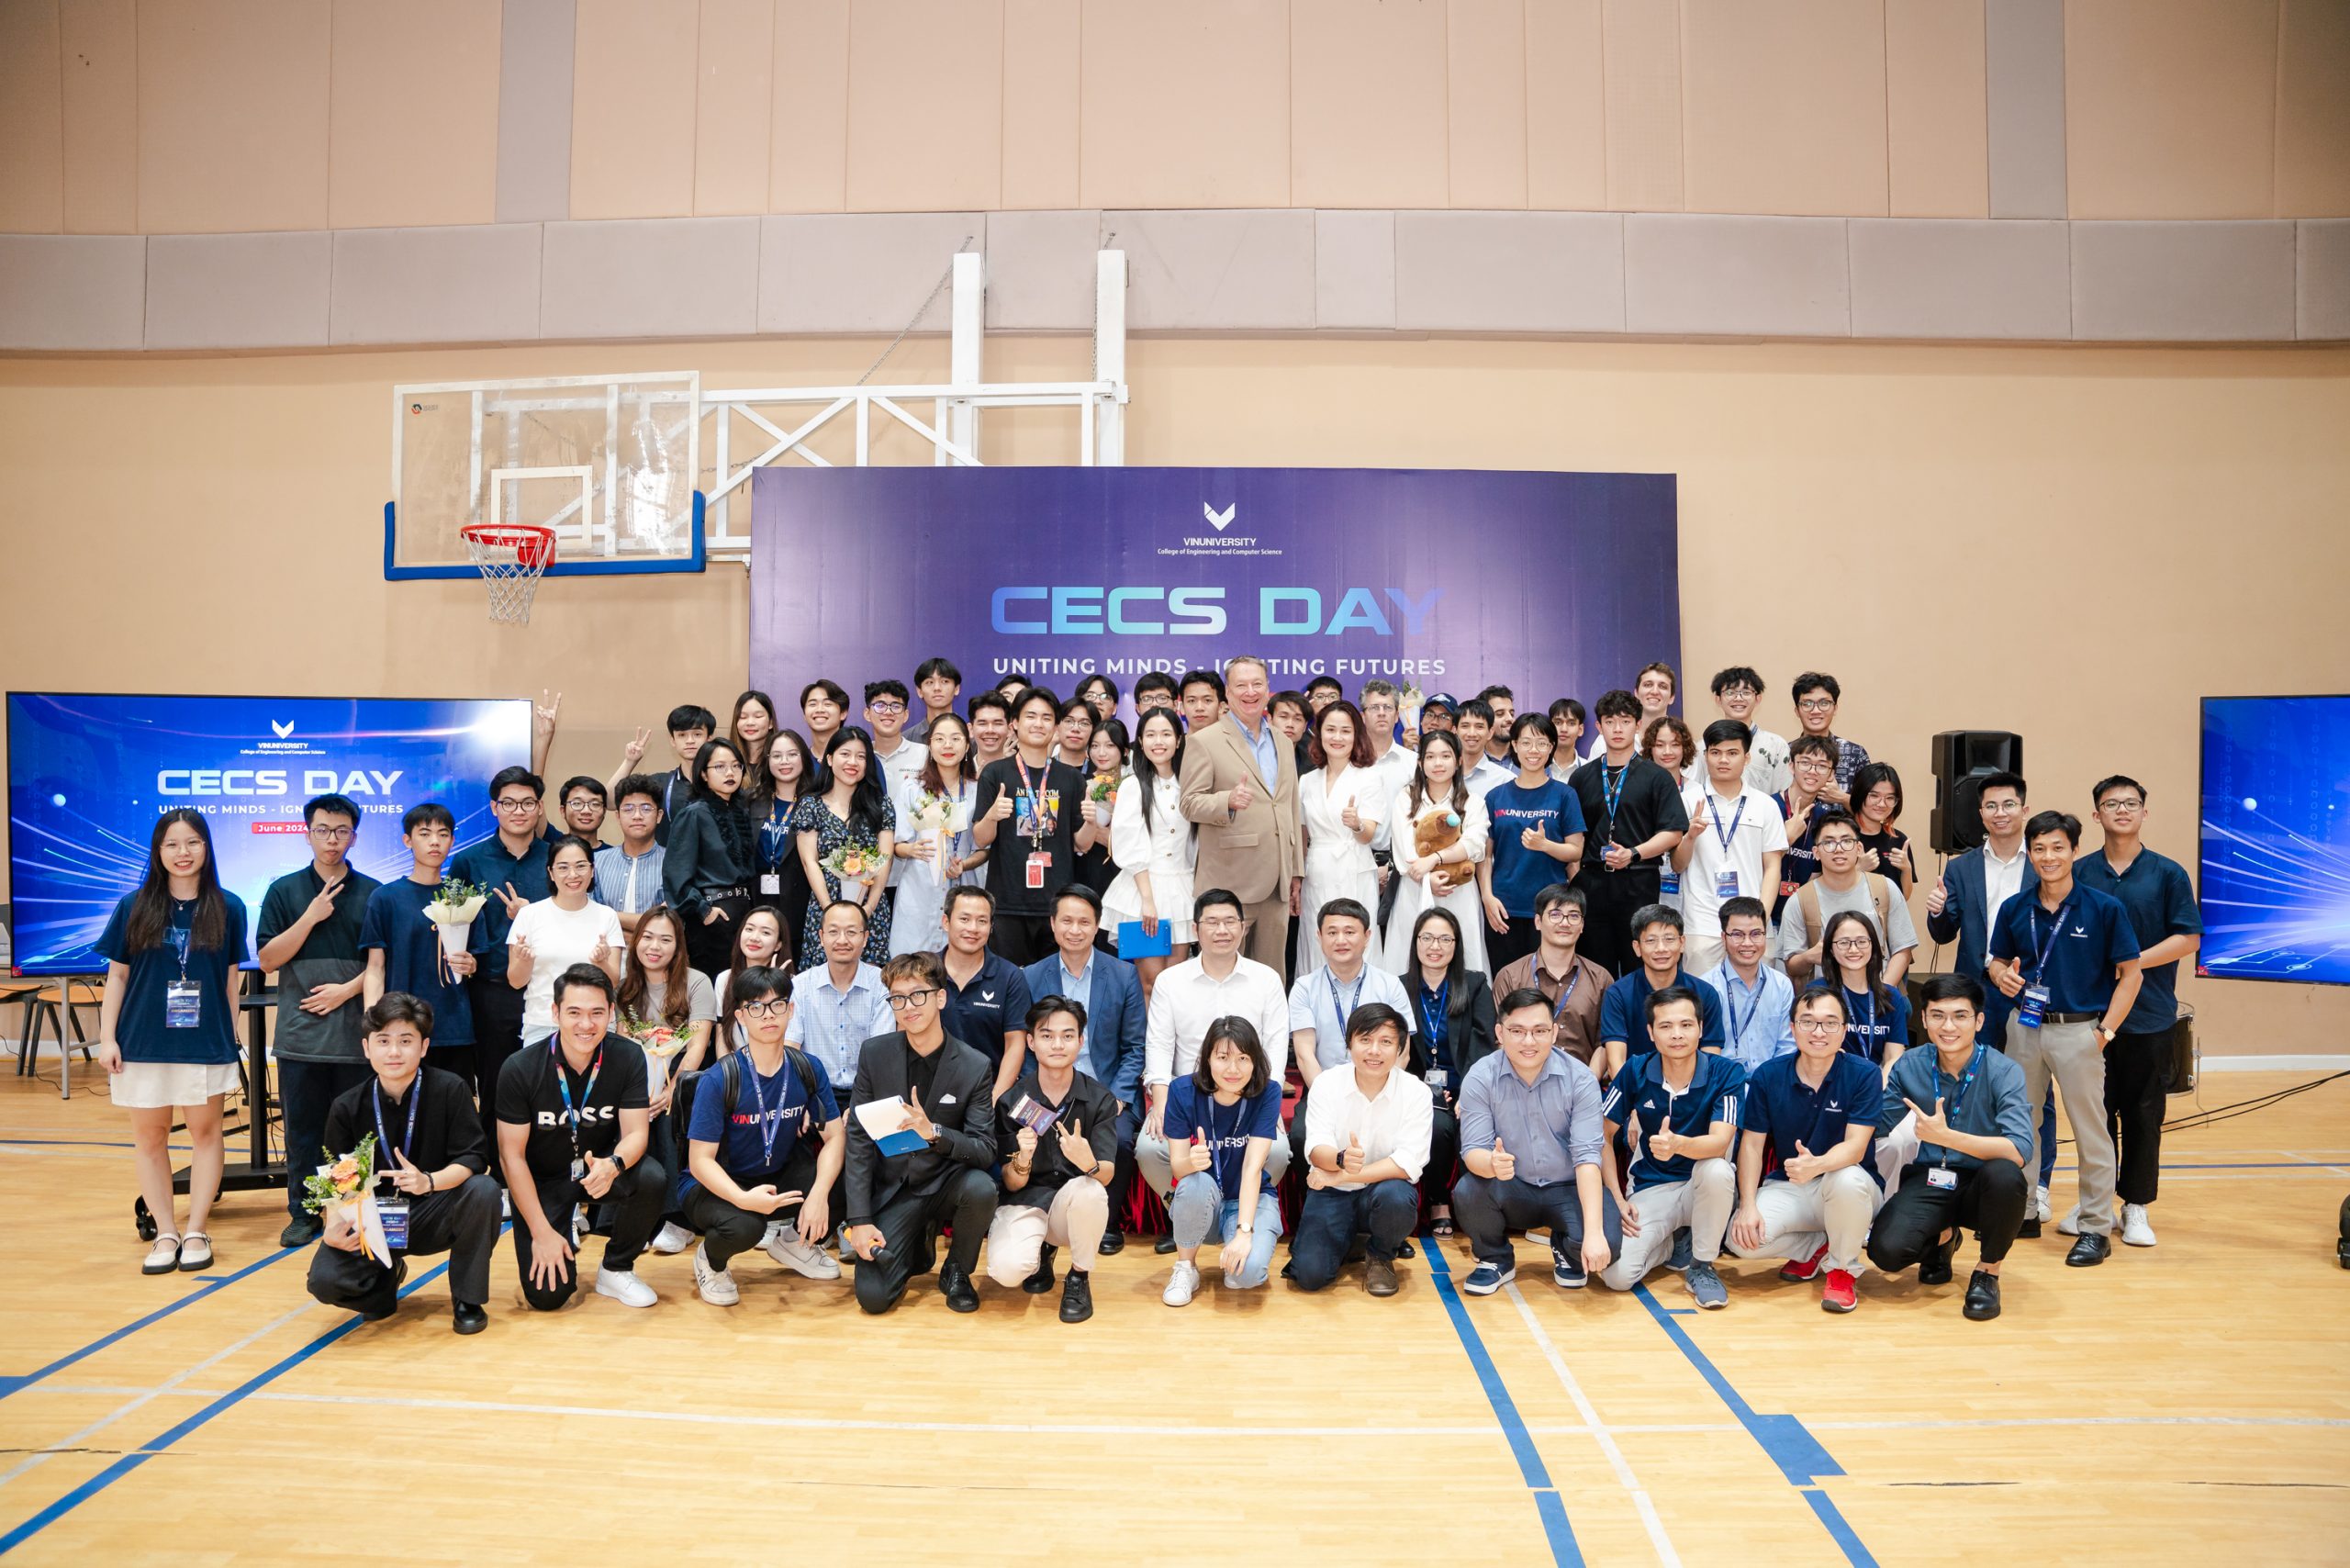 The College of Engineering & Computer Science successfully held CECS Day 2024 with the theme: “Uniting minds, Igniting futures”